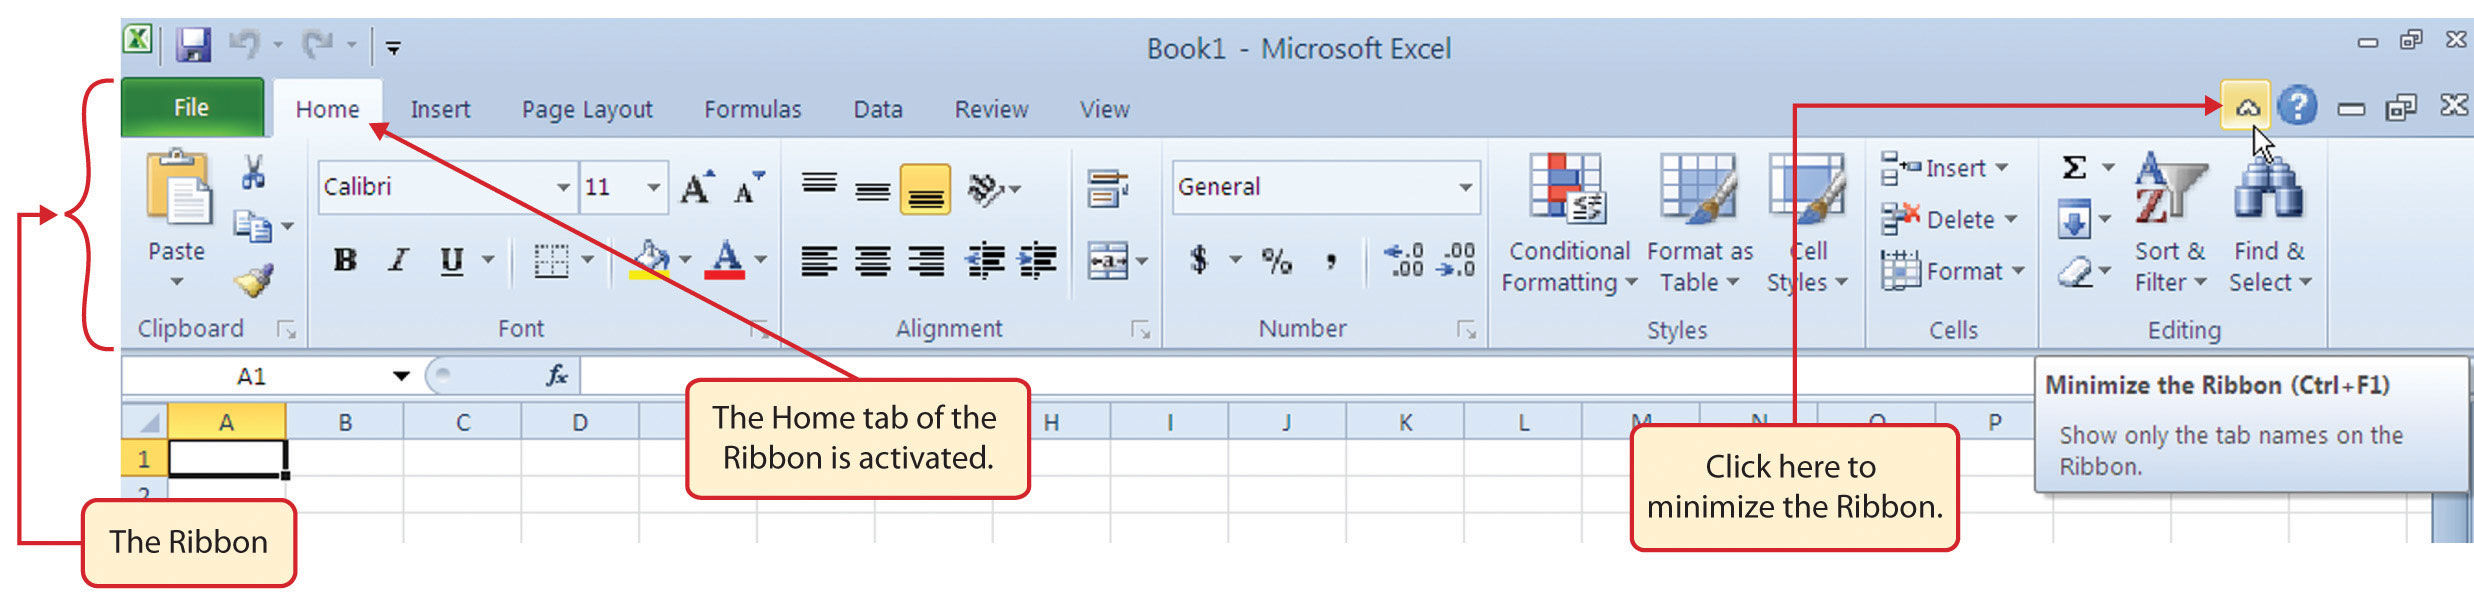 excel for mac 2016 hangs when closing file